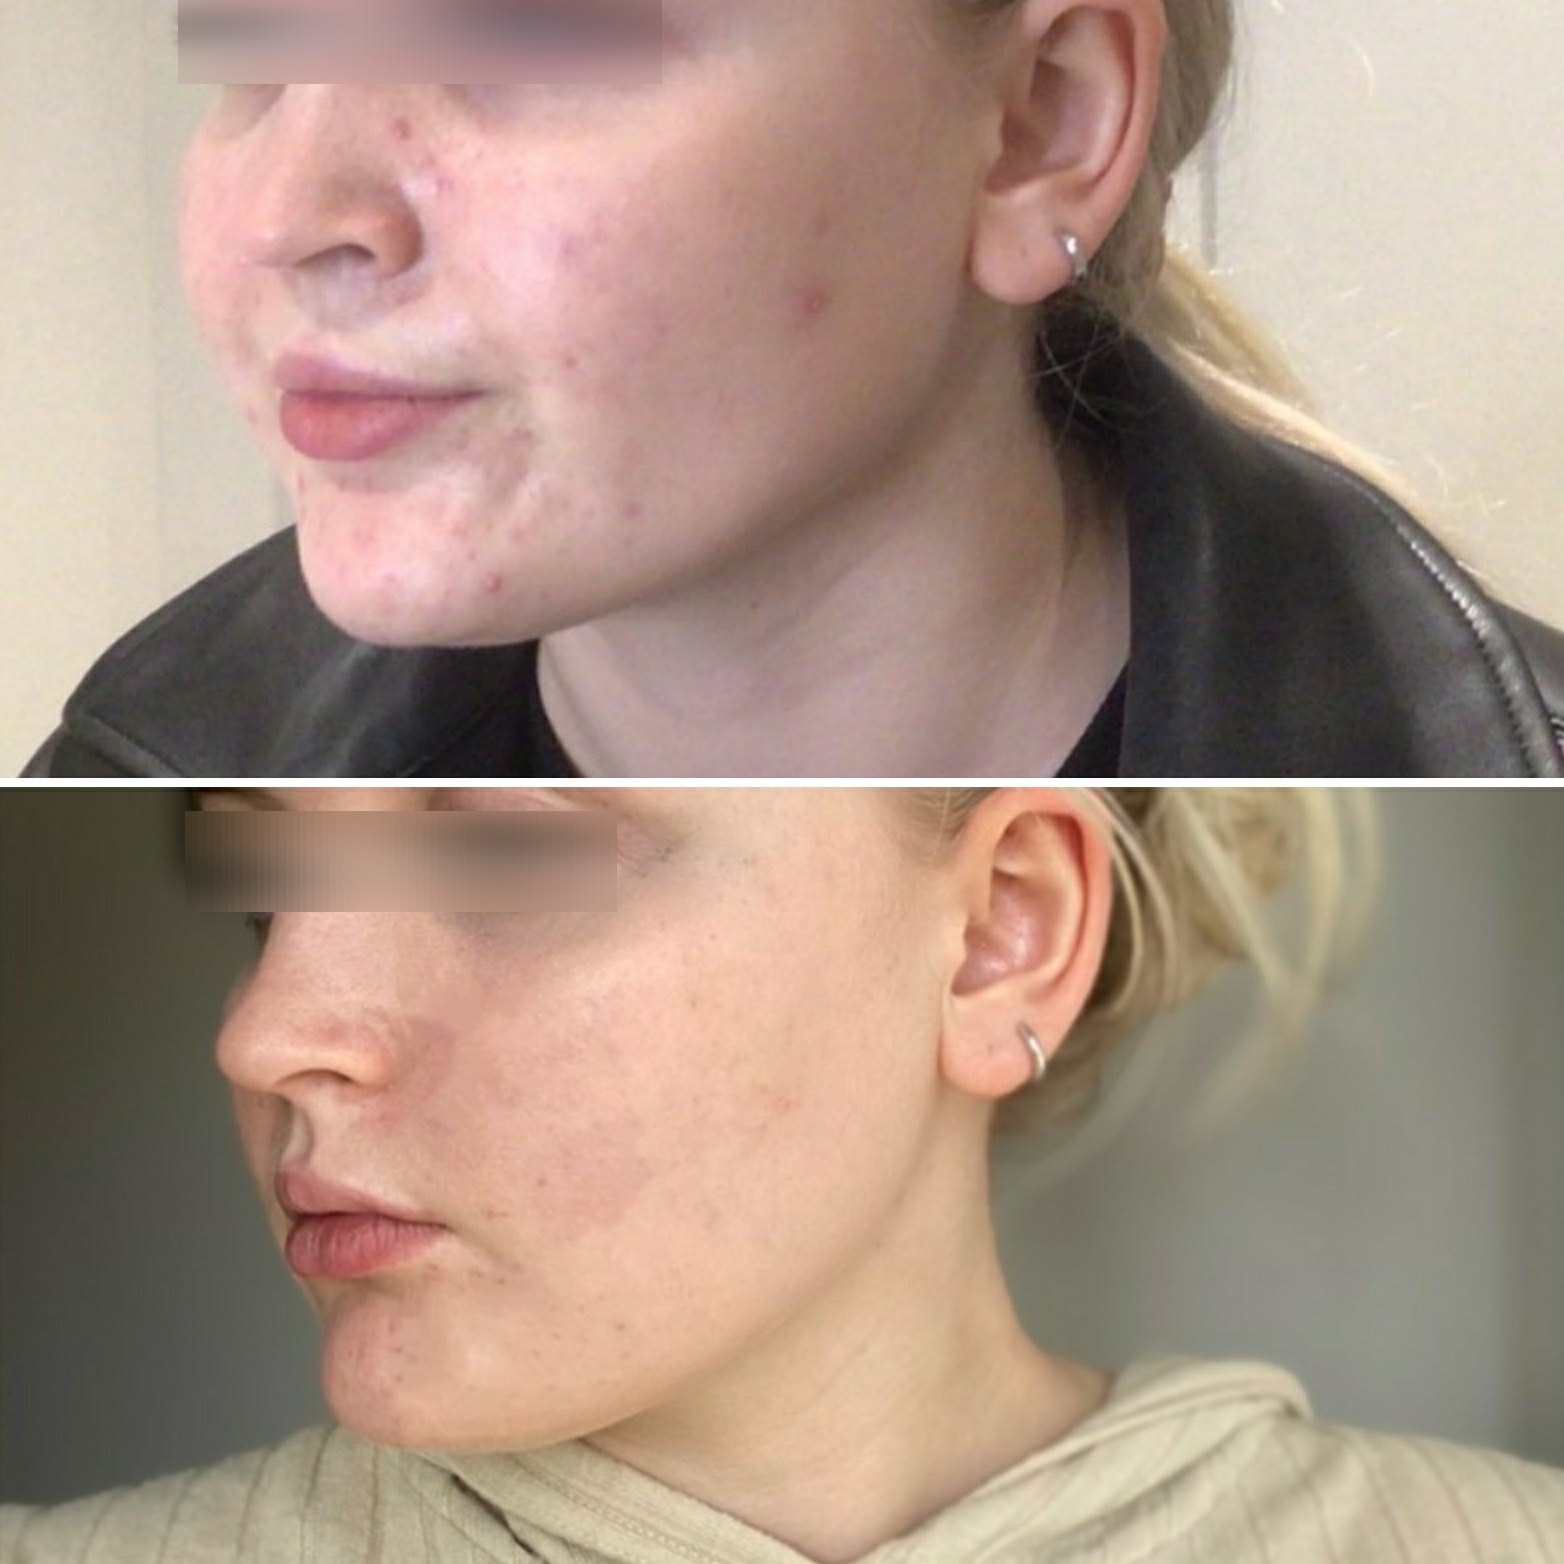 Jawline dermal filler result before and after photos by Dr Kara Cosmetic Clinic, Norwch , Norfolk , UK